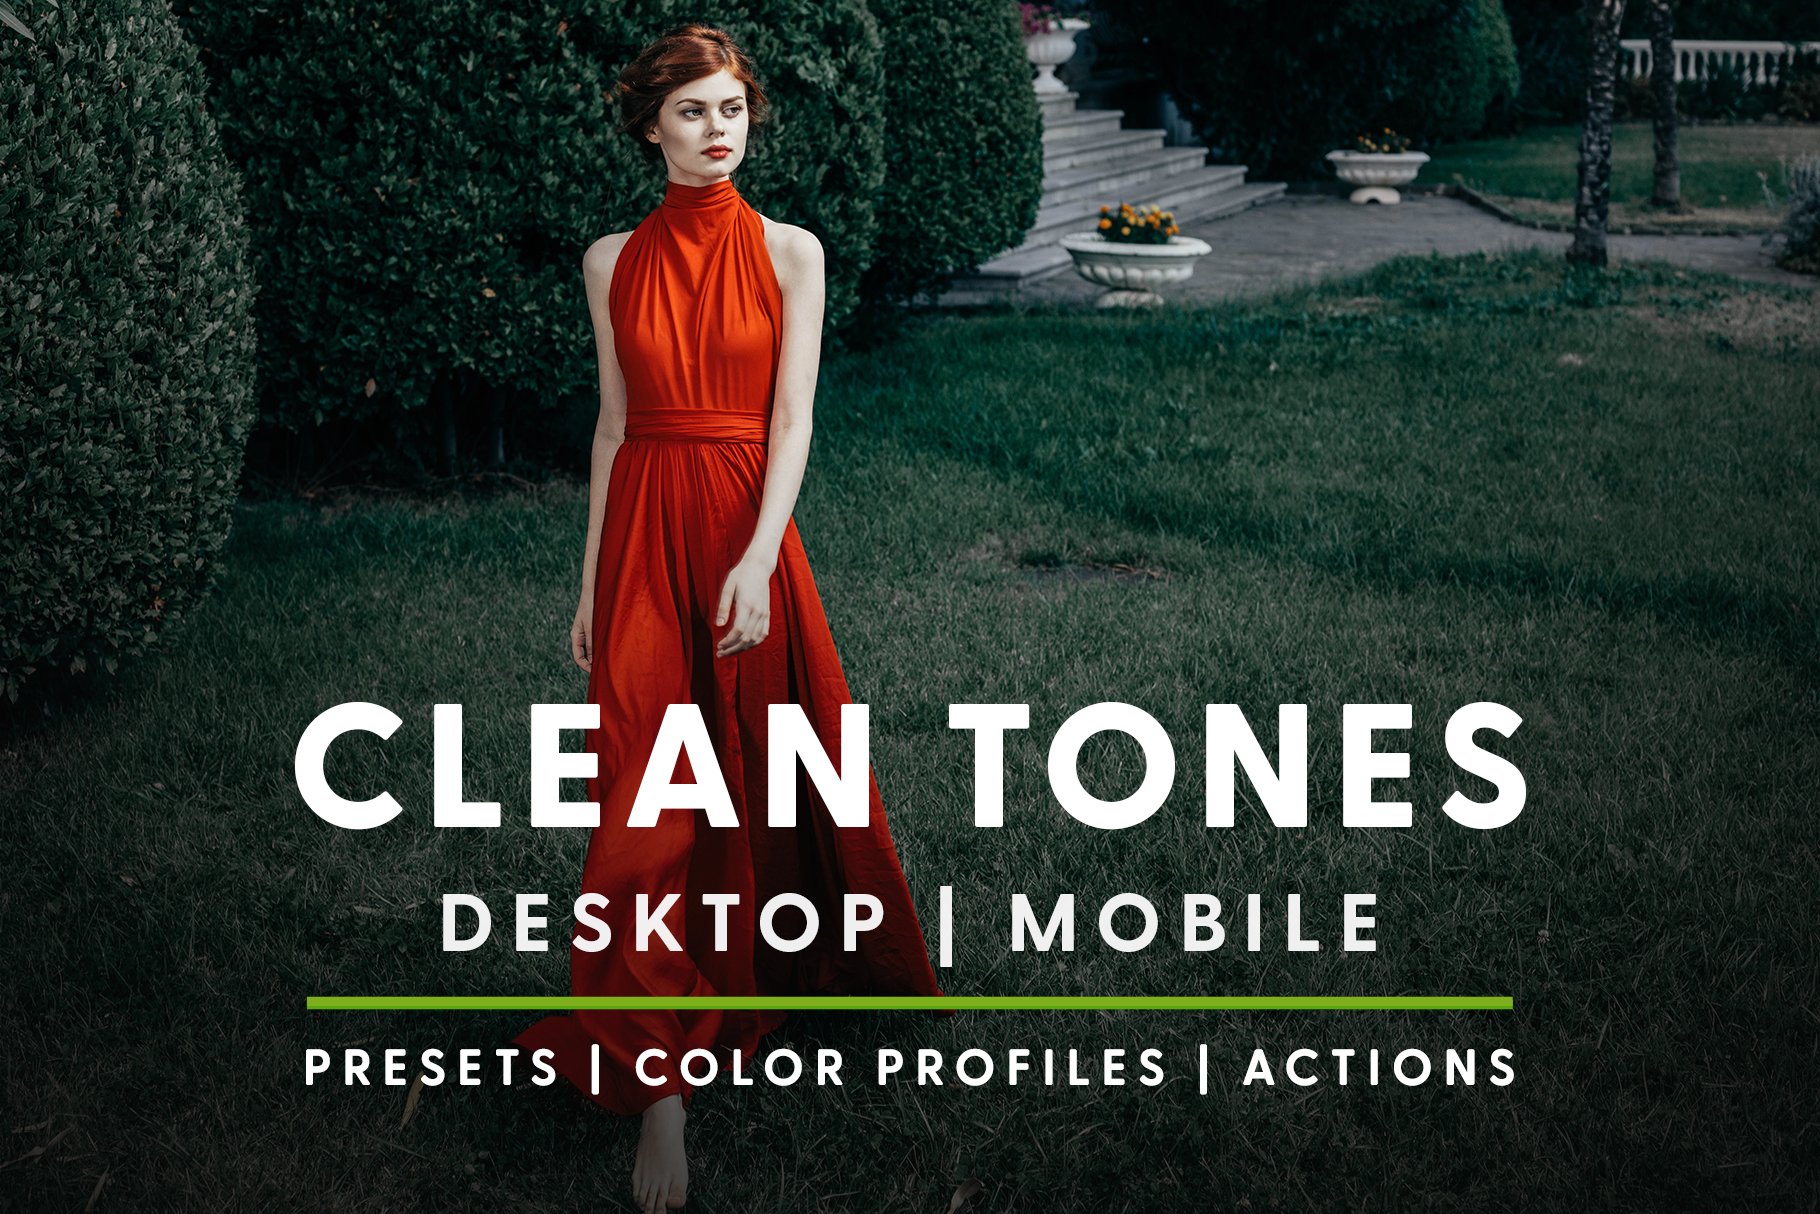 Clean Tones - Actions & Presetscover image.